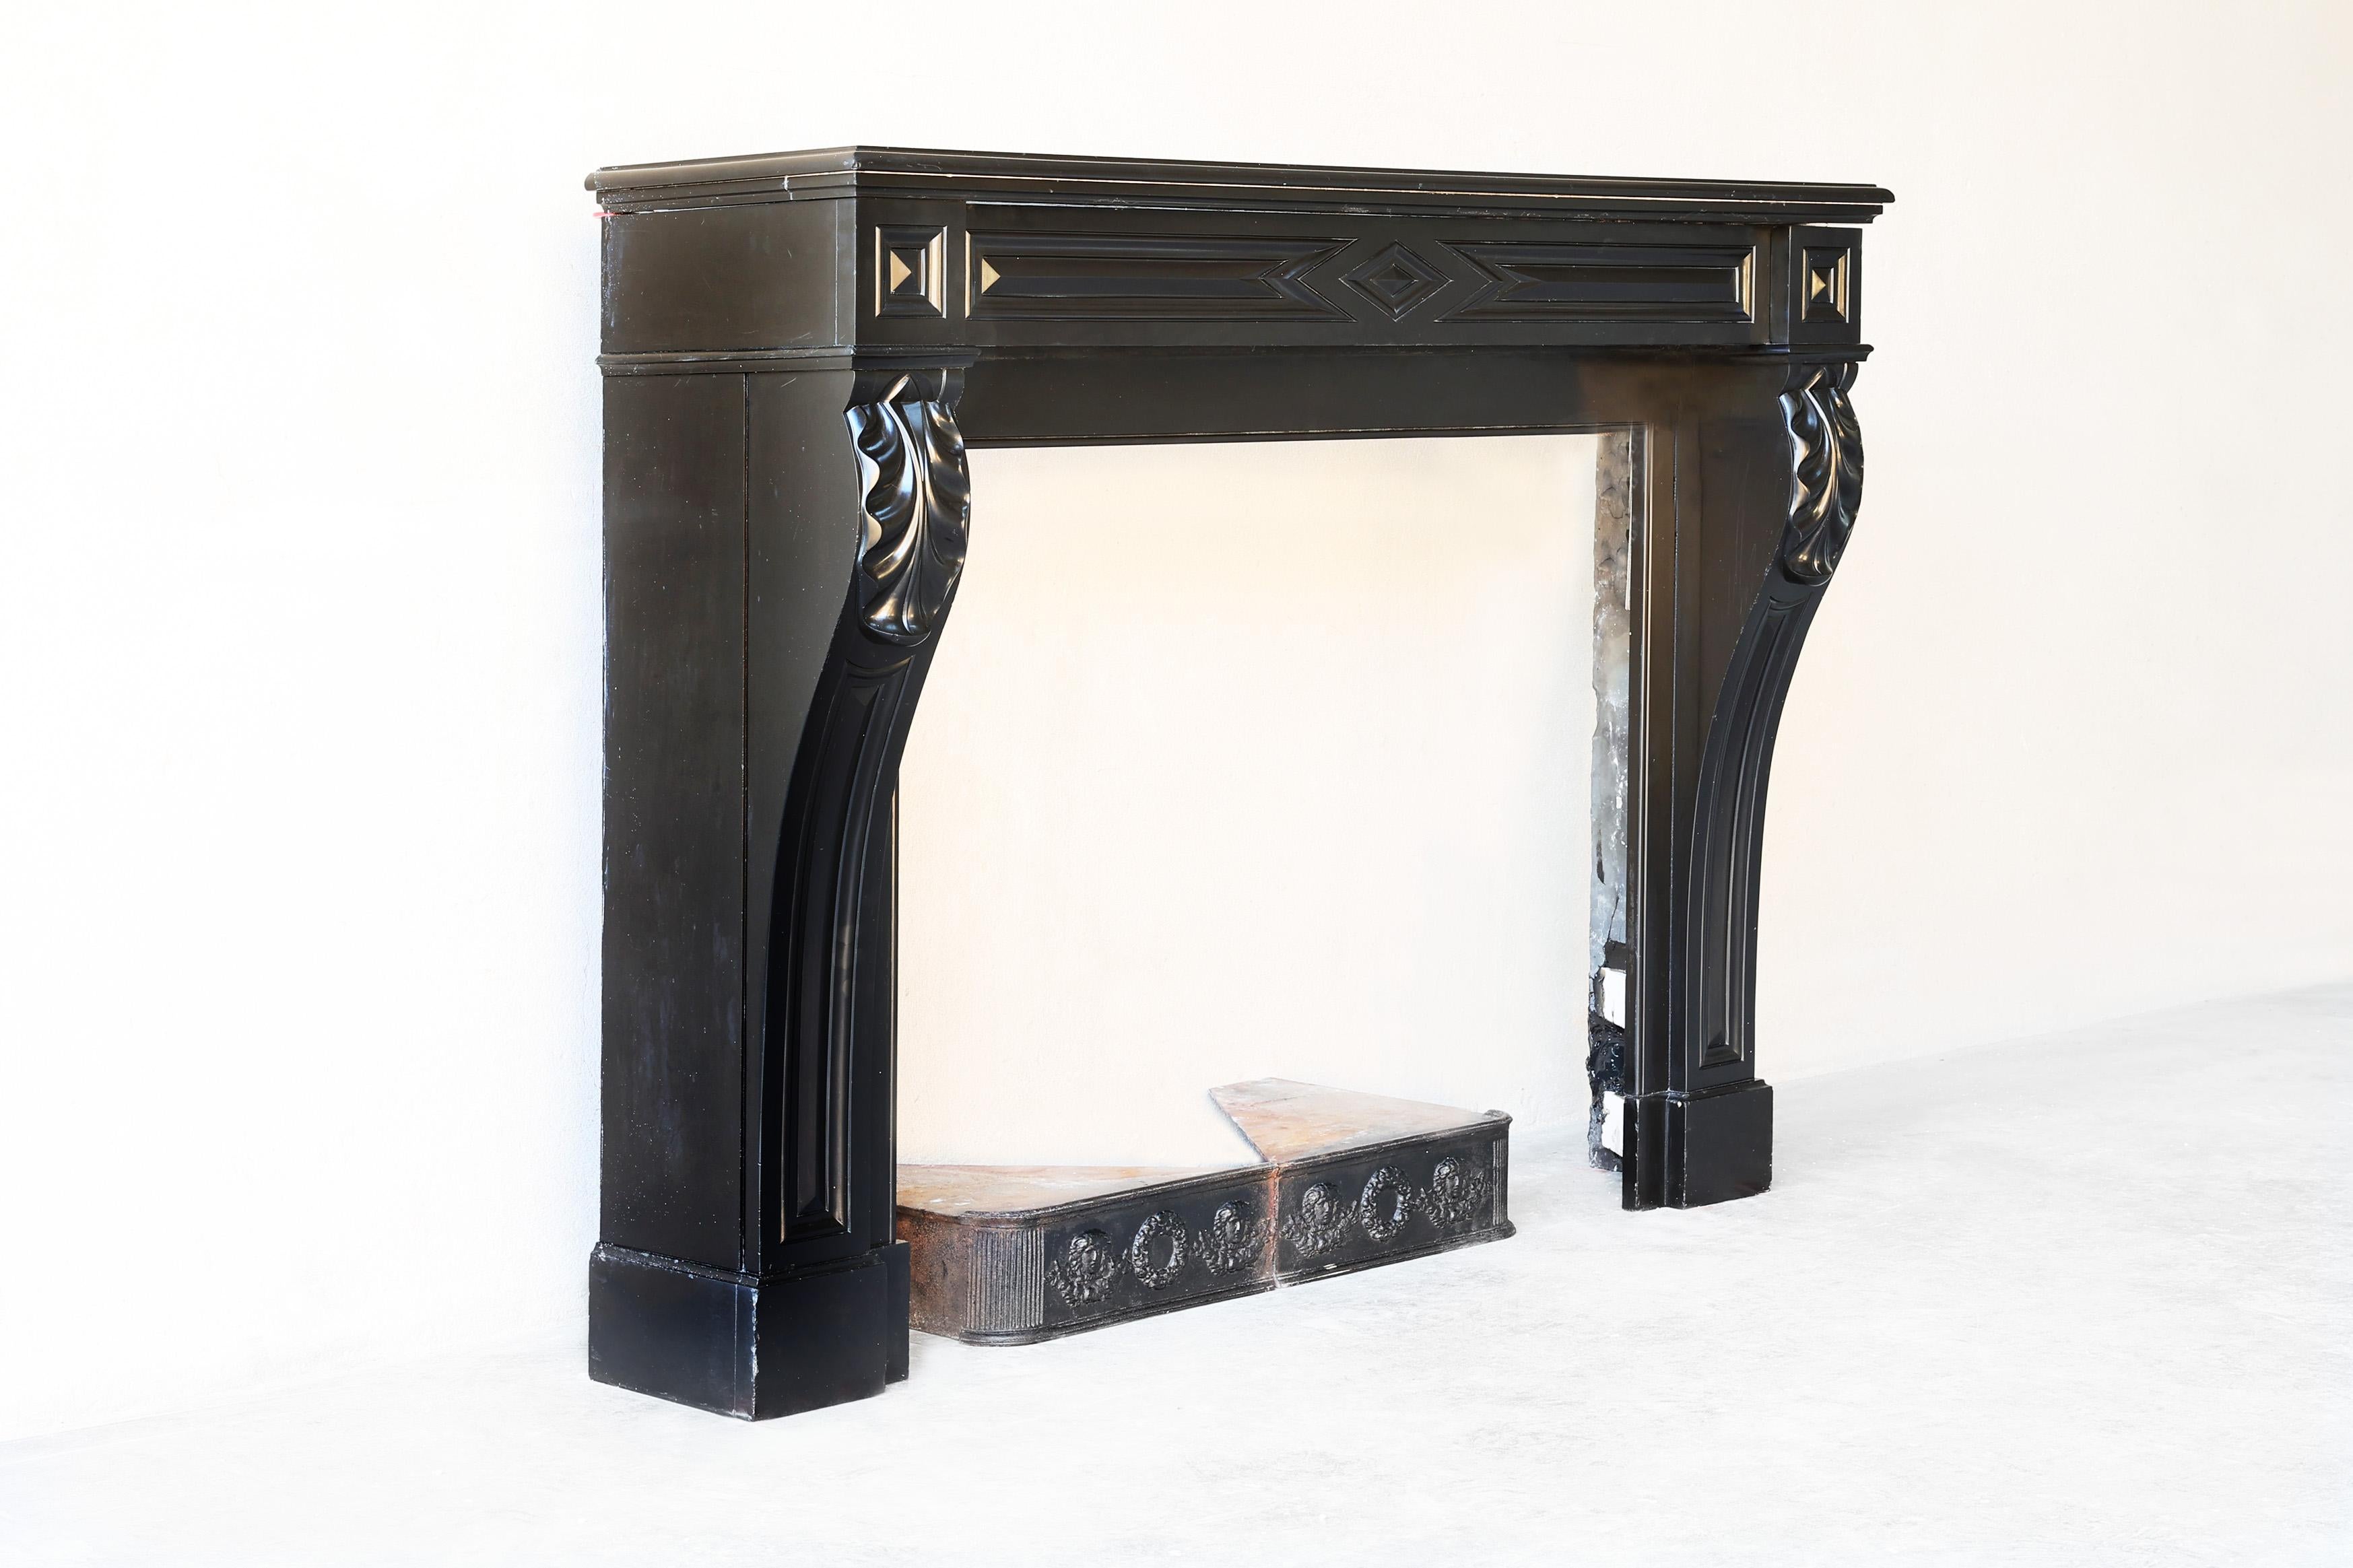 Beautiful Noir de Mazy marble fireplace from the 19th century in the style of Louis XVI. This antique fireplace has a straight top and slightly curved legs. The fireplace has beautiful ornaments and decorations and fits into many interiors.